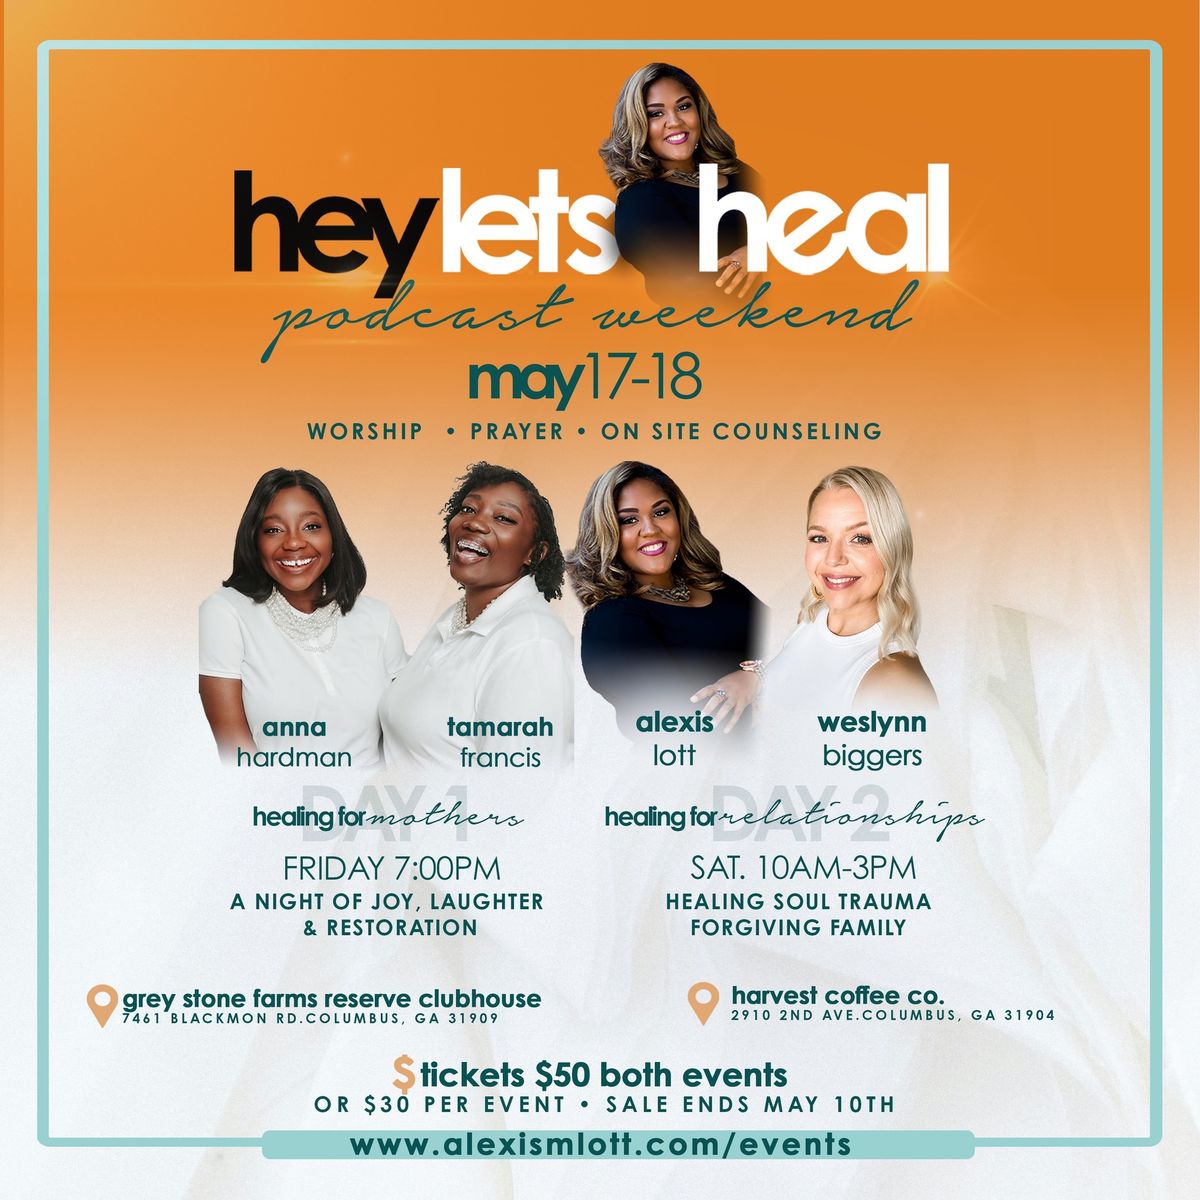 Hey Let\u2019s Heal Live Podcast Weekend 